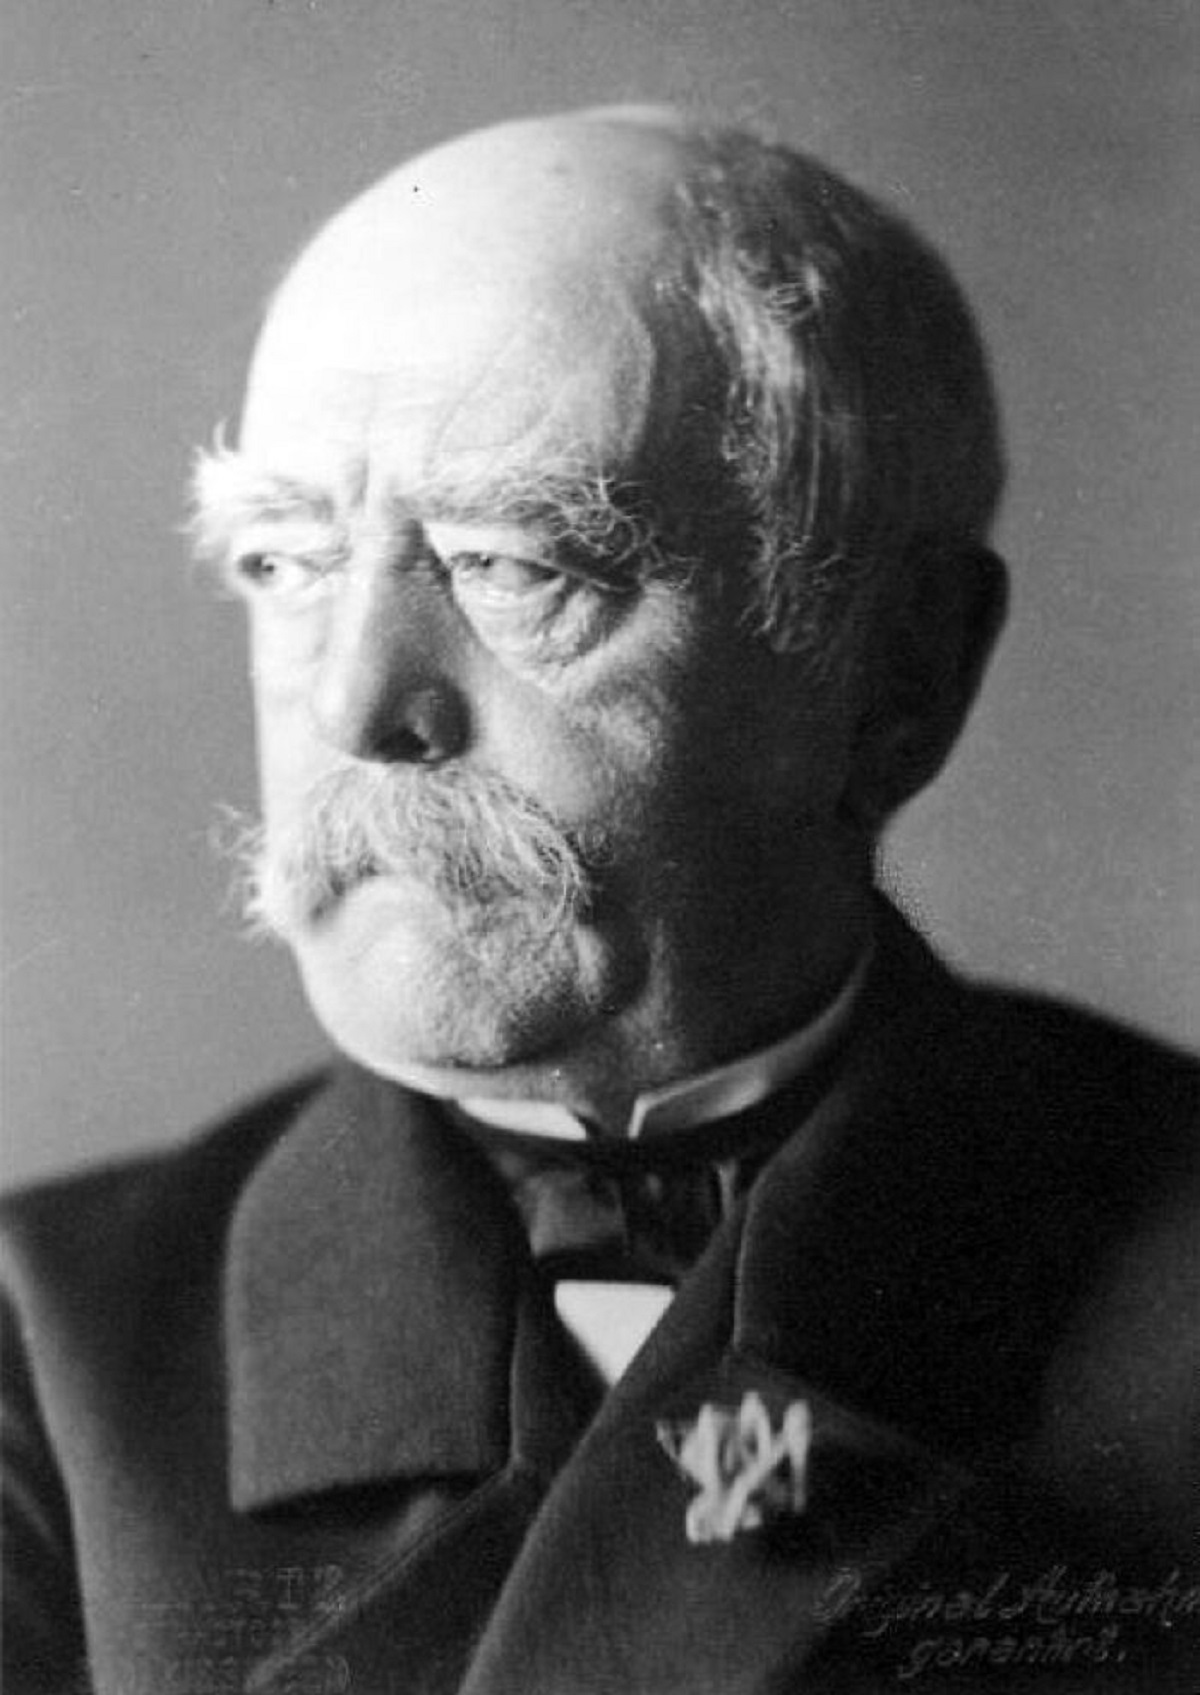 That Otto Von Bismarck managed a posthumous snub of Wilhelm II, by having his own sarcophagus inscribed with the words, “A loyal German servant of Emperor Wilhelm I”.